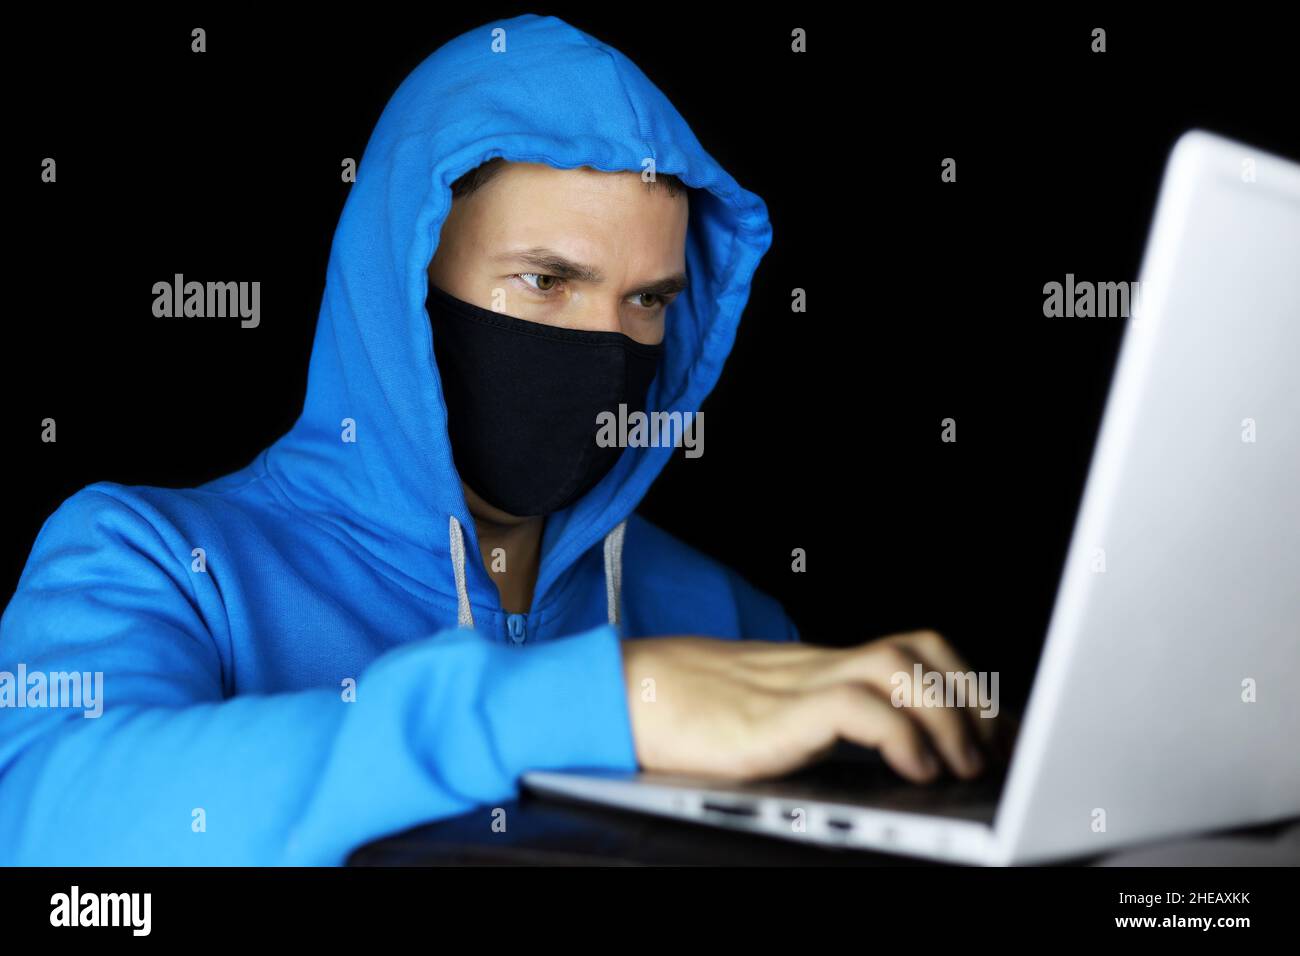 Man in mask and blue hoodie sitting with laptop on black background. Concept of cyber crime, hacking and technology Stock Photo